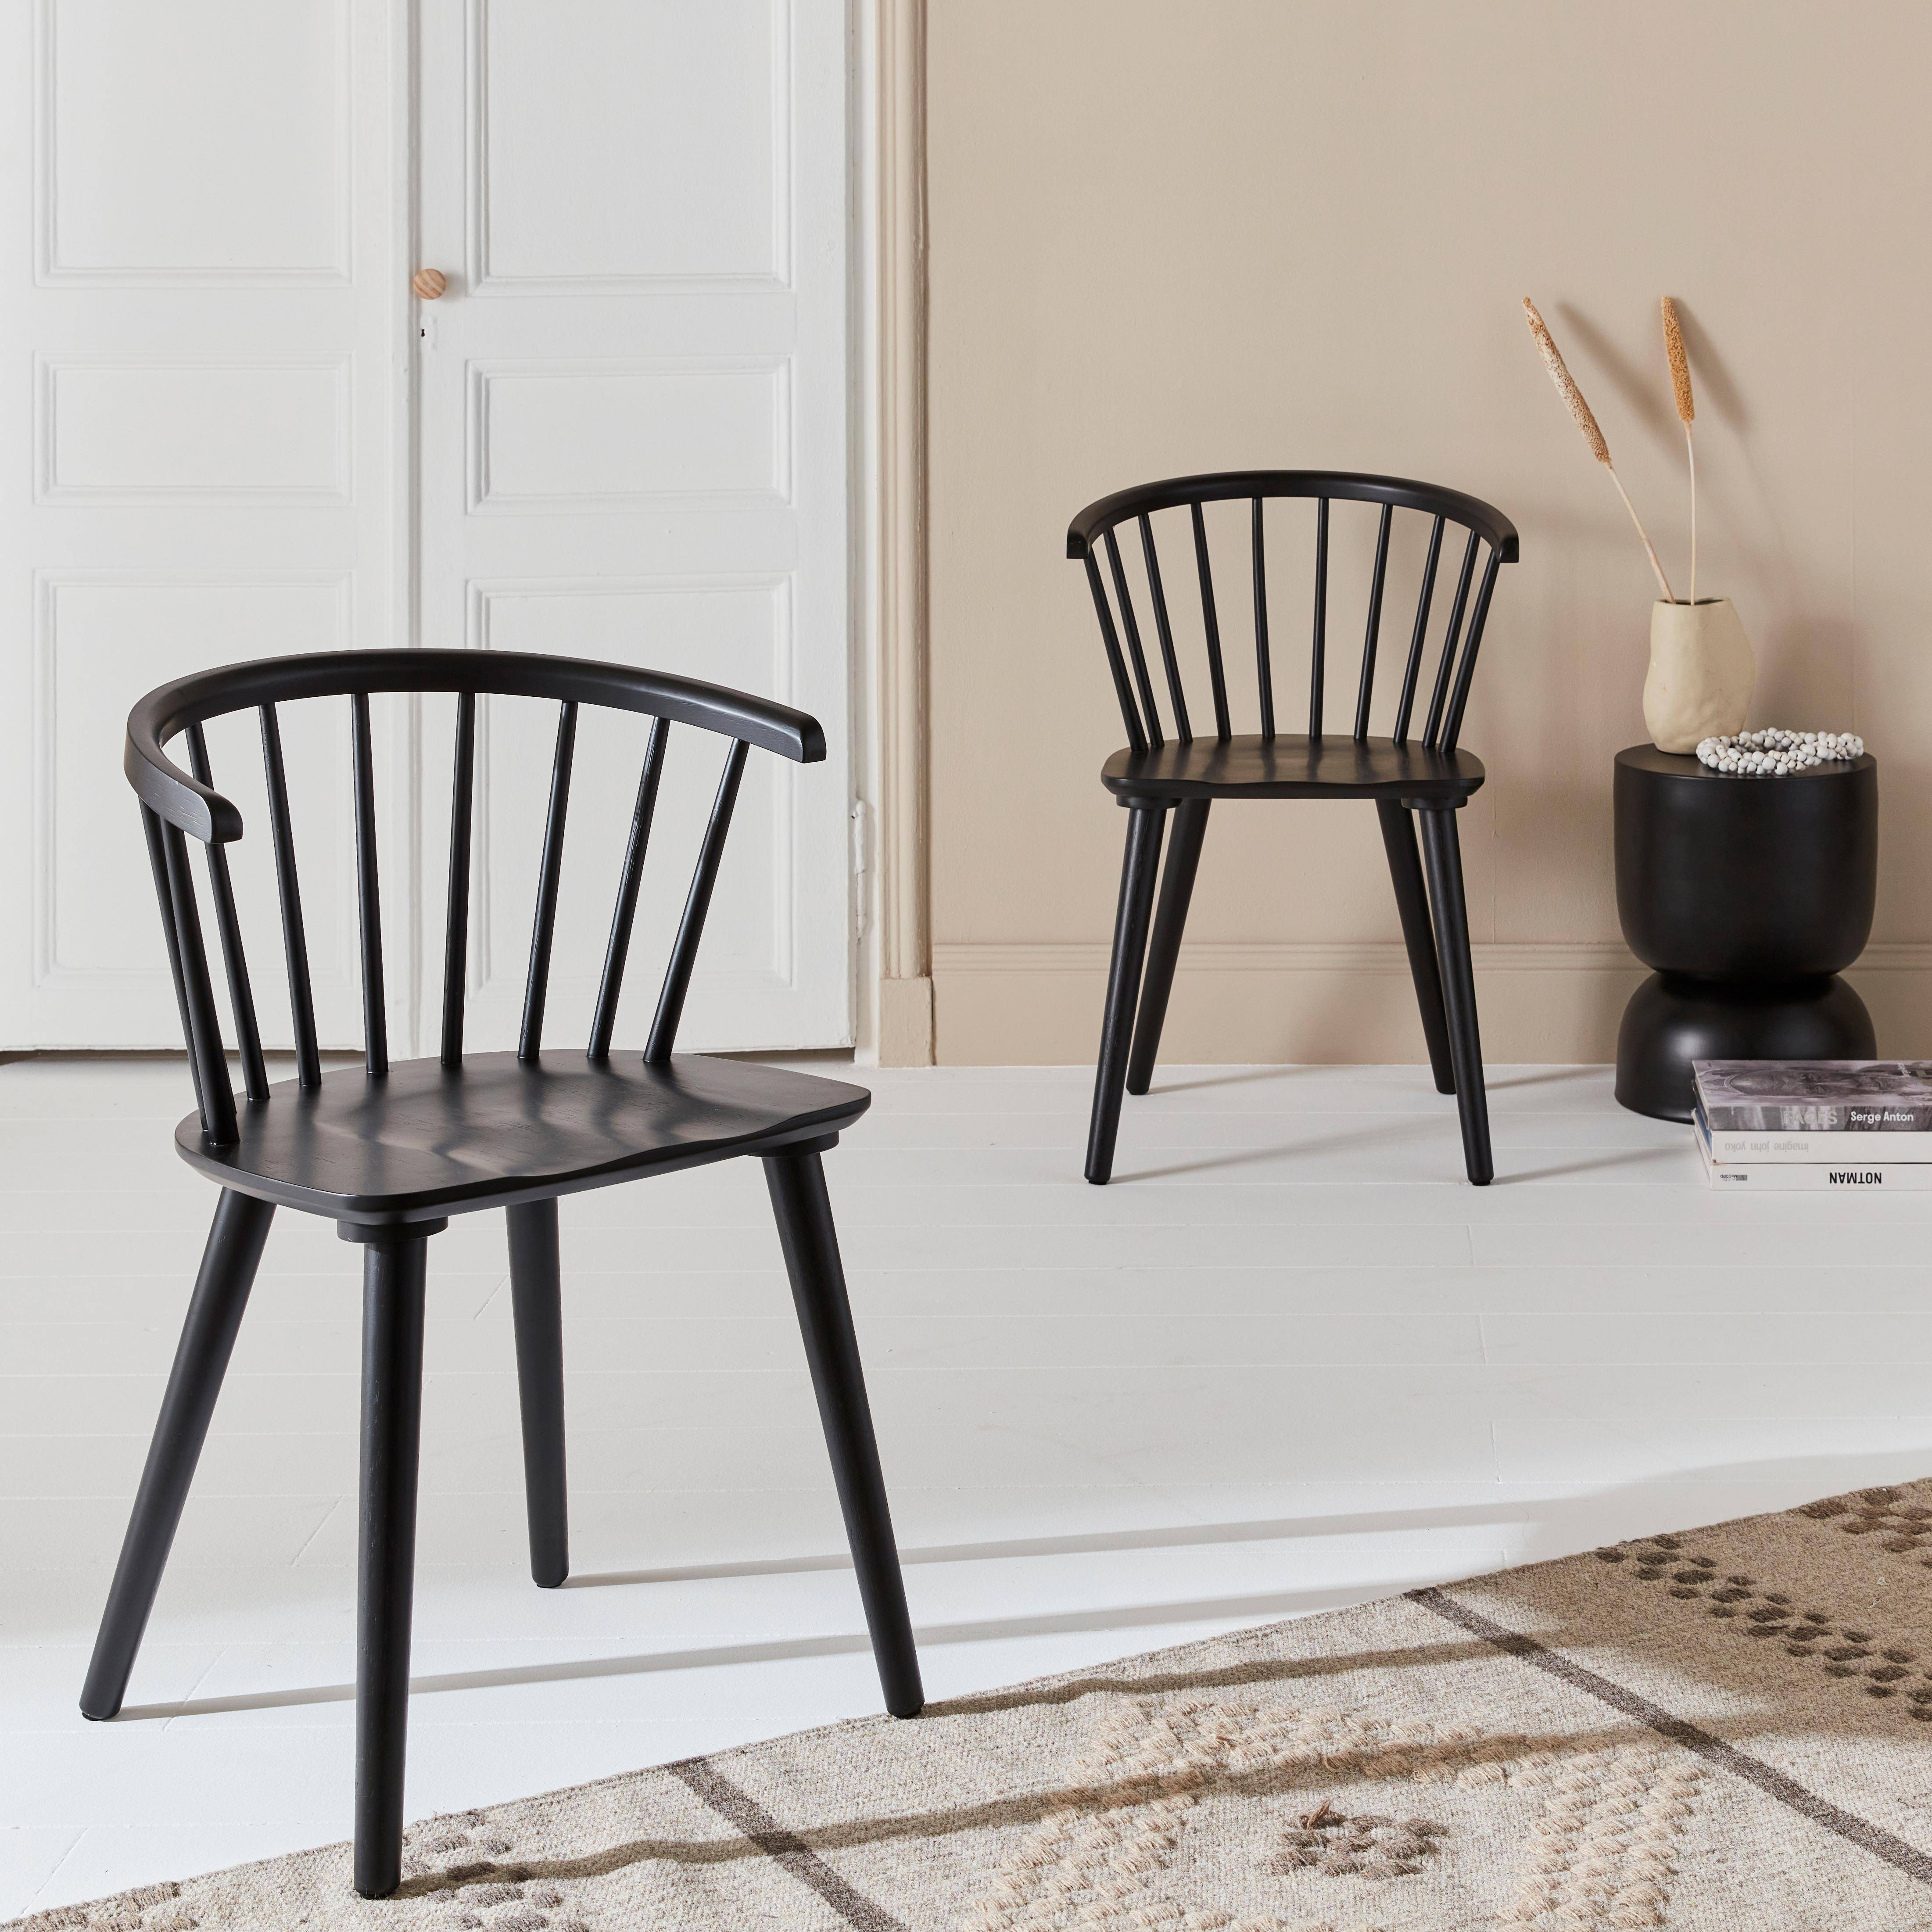 Pair of  Wood and Plywood Spindle Chairs, black, L53 x W47.5 x H76cm ,sweeek,Photo1